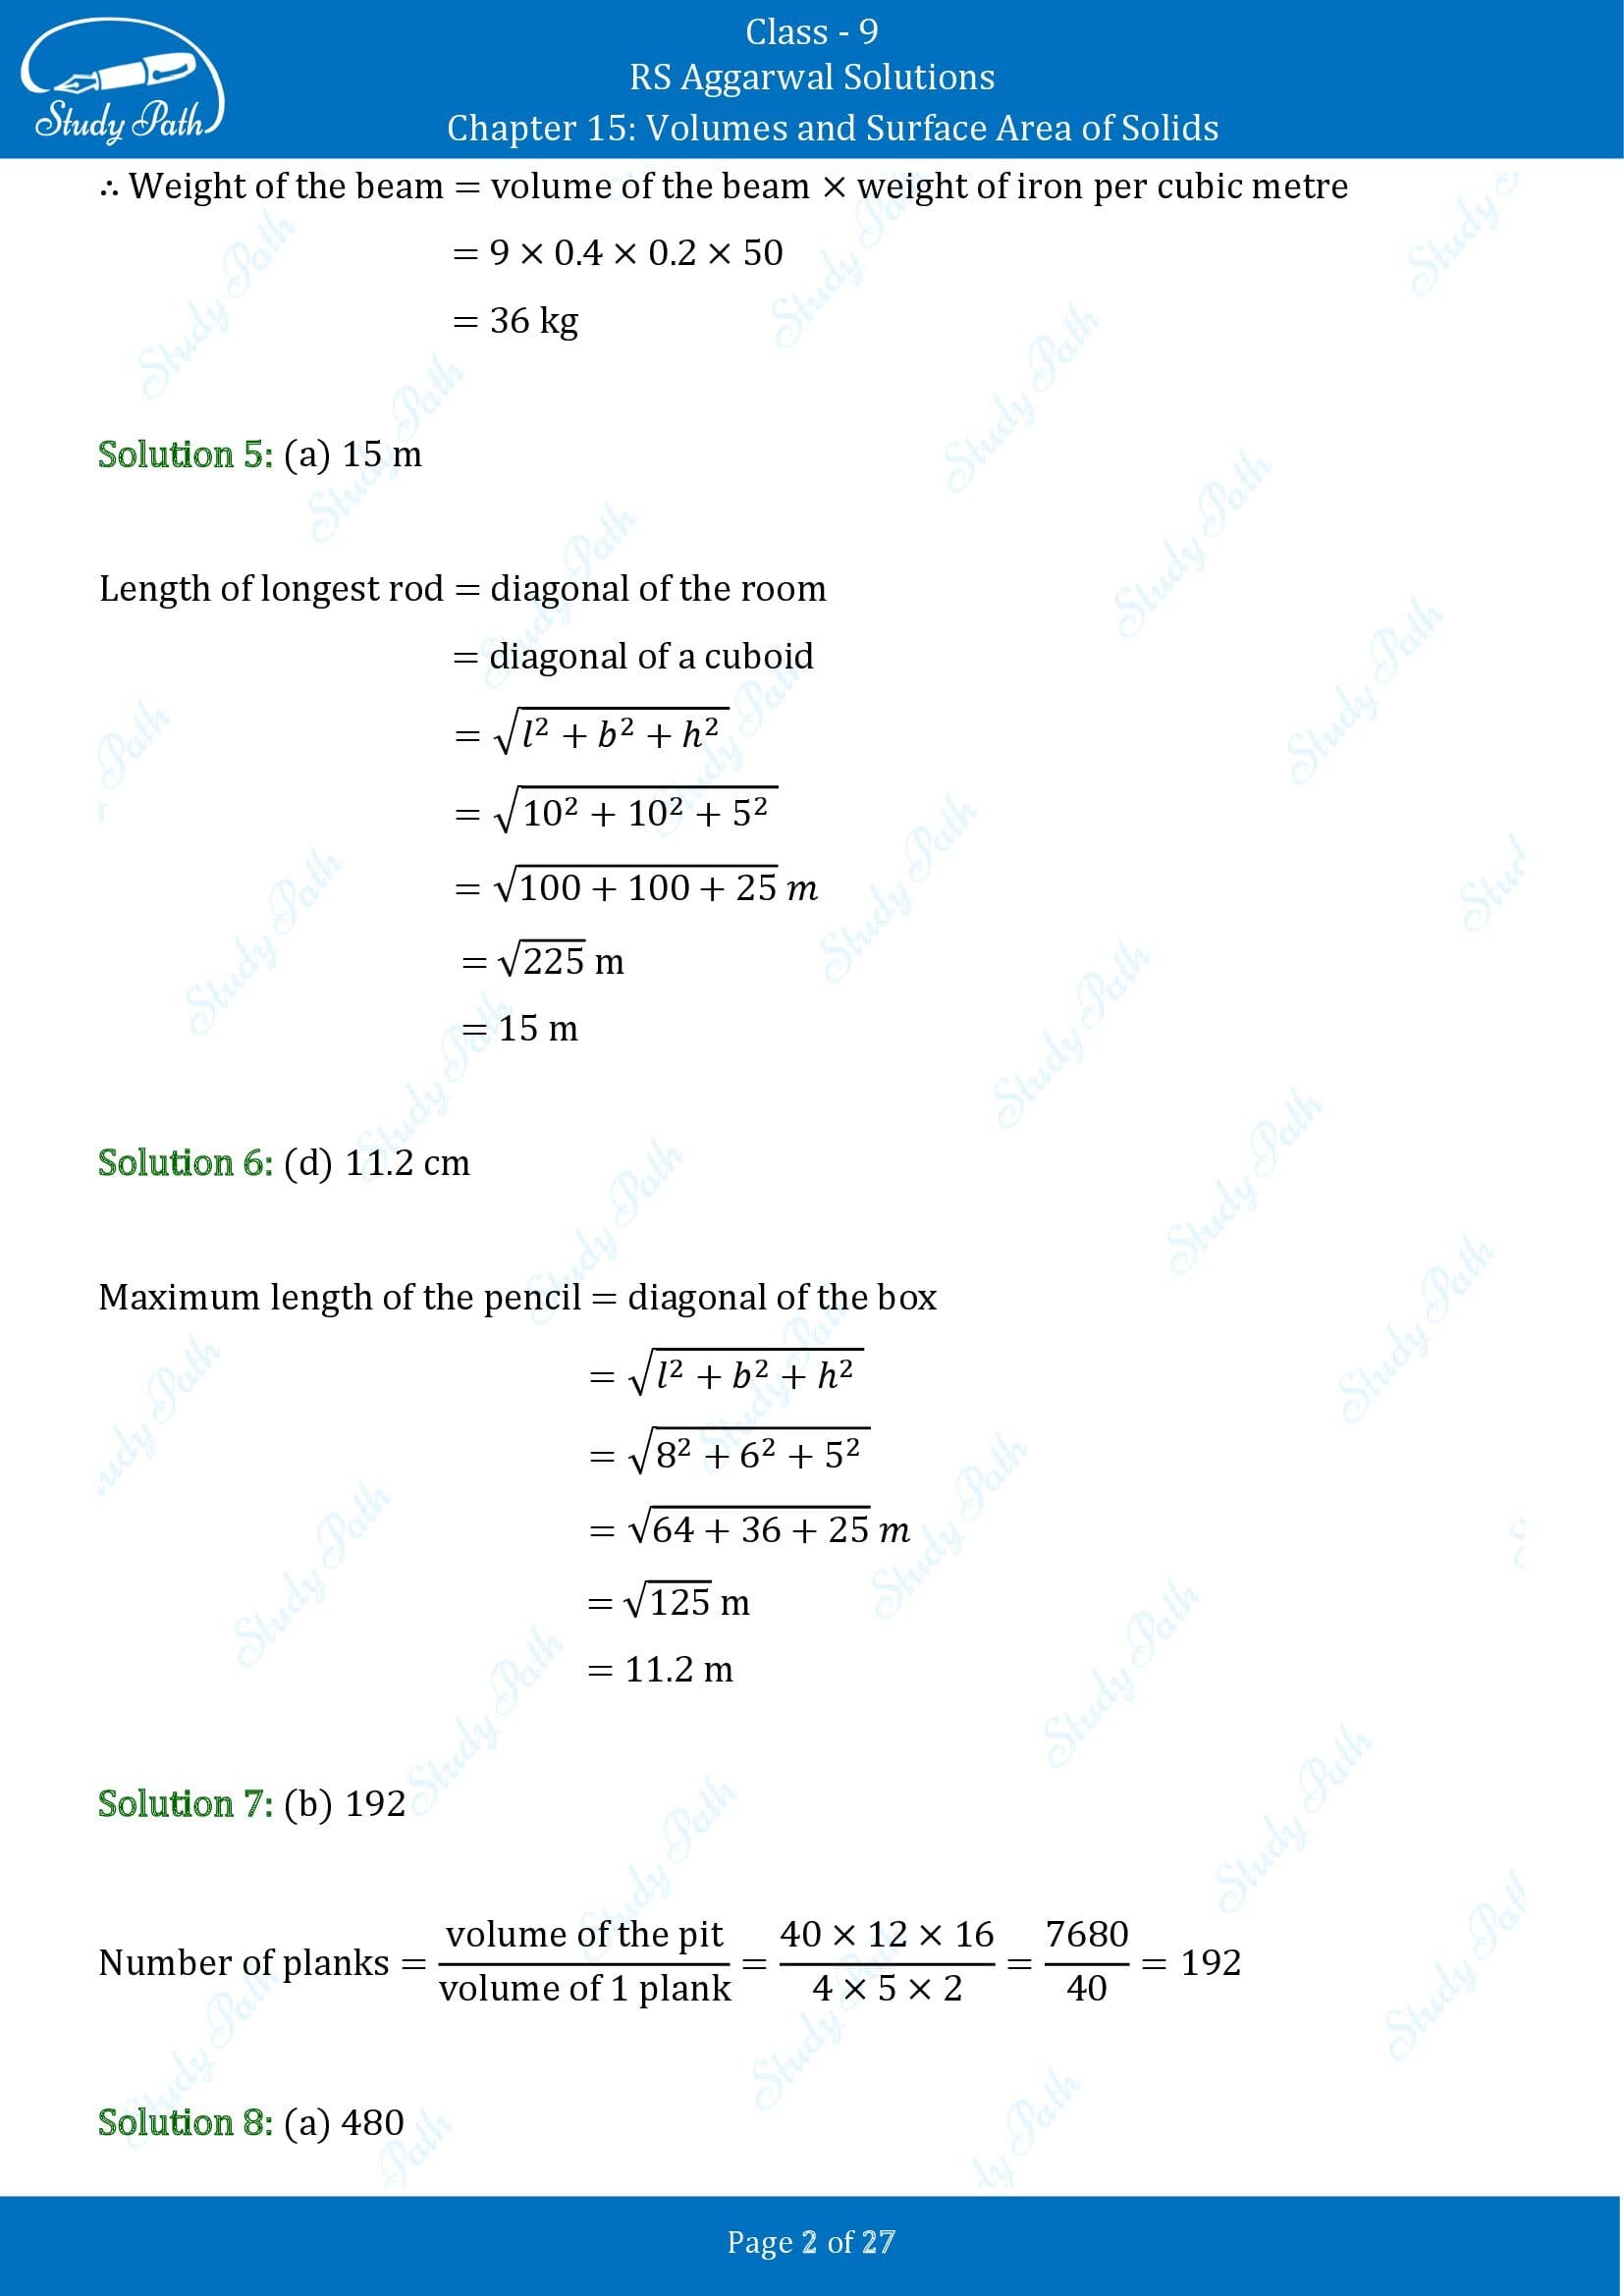 RS Aggarwal Solutions Class 9 Chapter 15 Volumes and Surface Area of Solids Multiple Choice Questions MCQs 00002